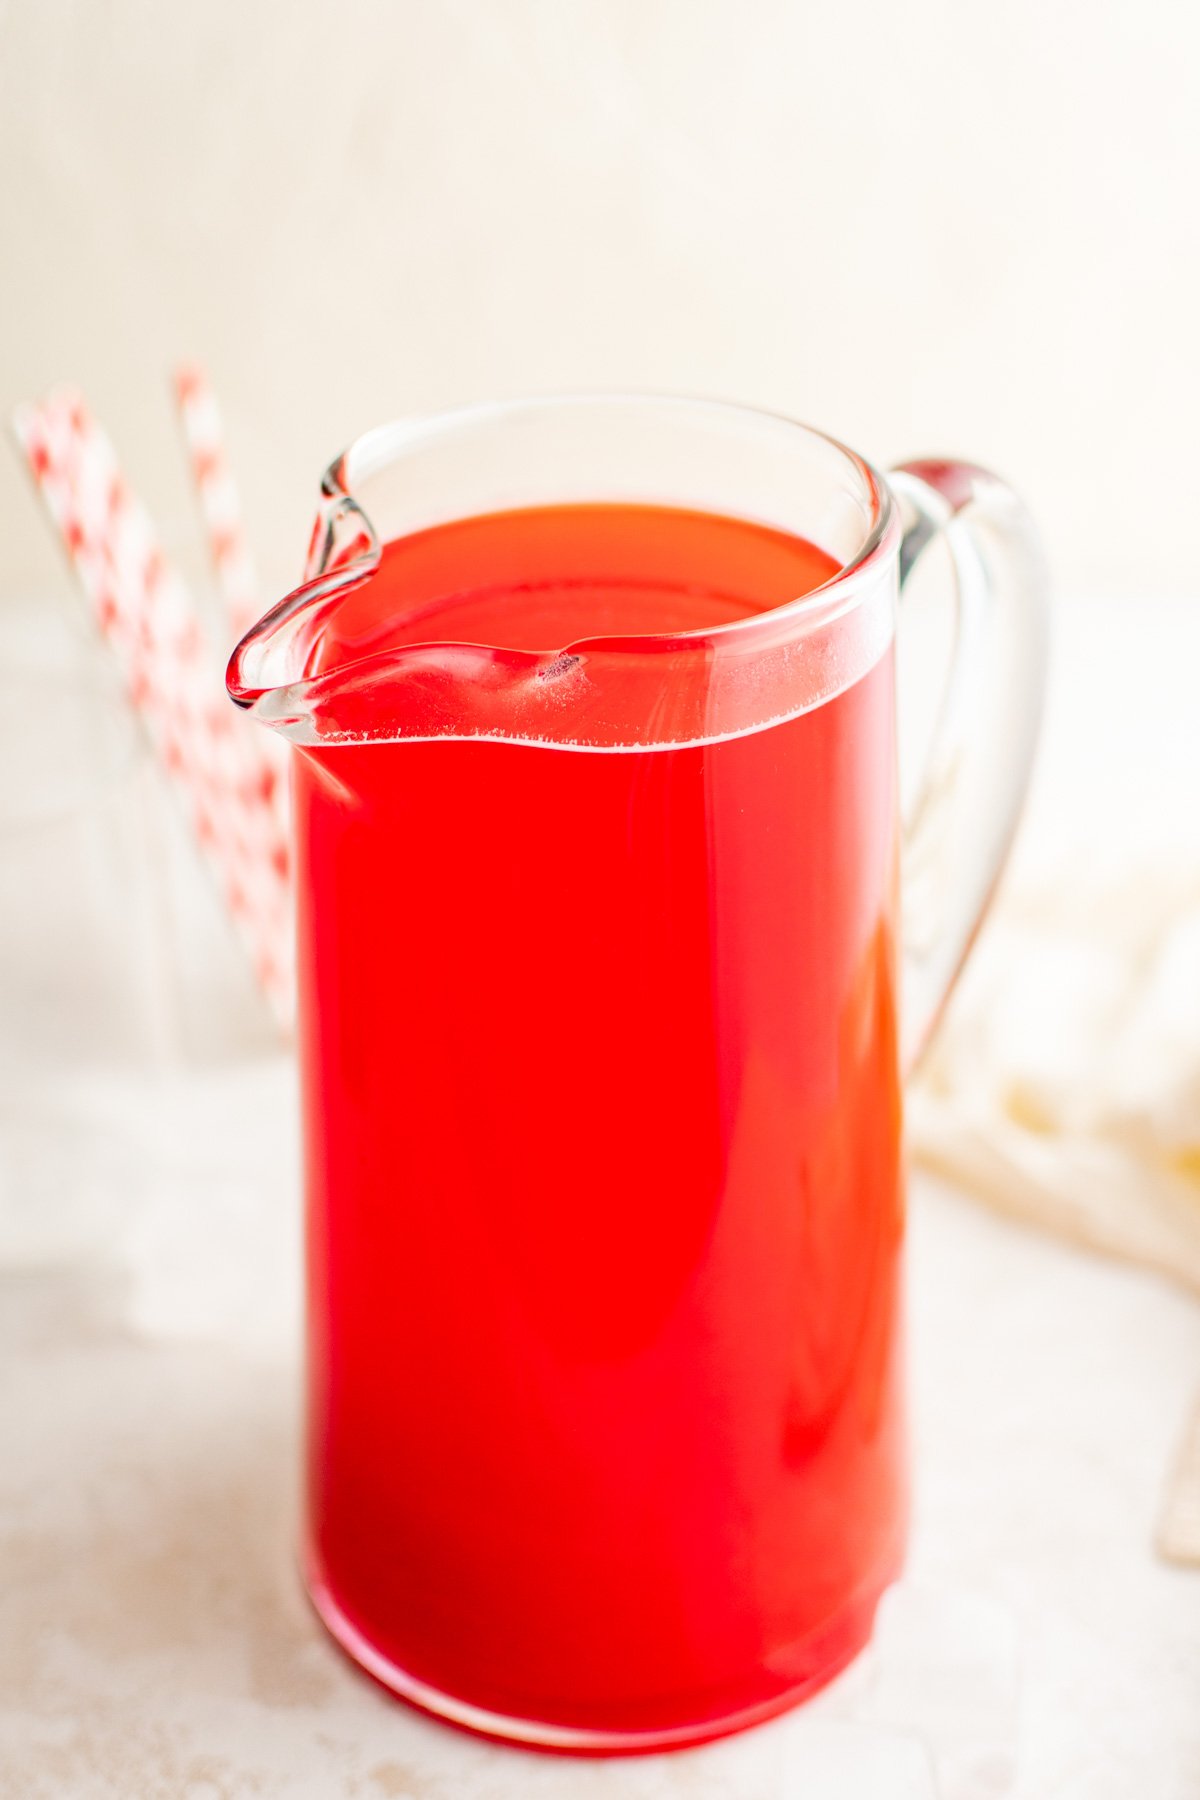 Hawaiian punch in a glass pitcher with red striped straws.